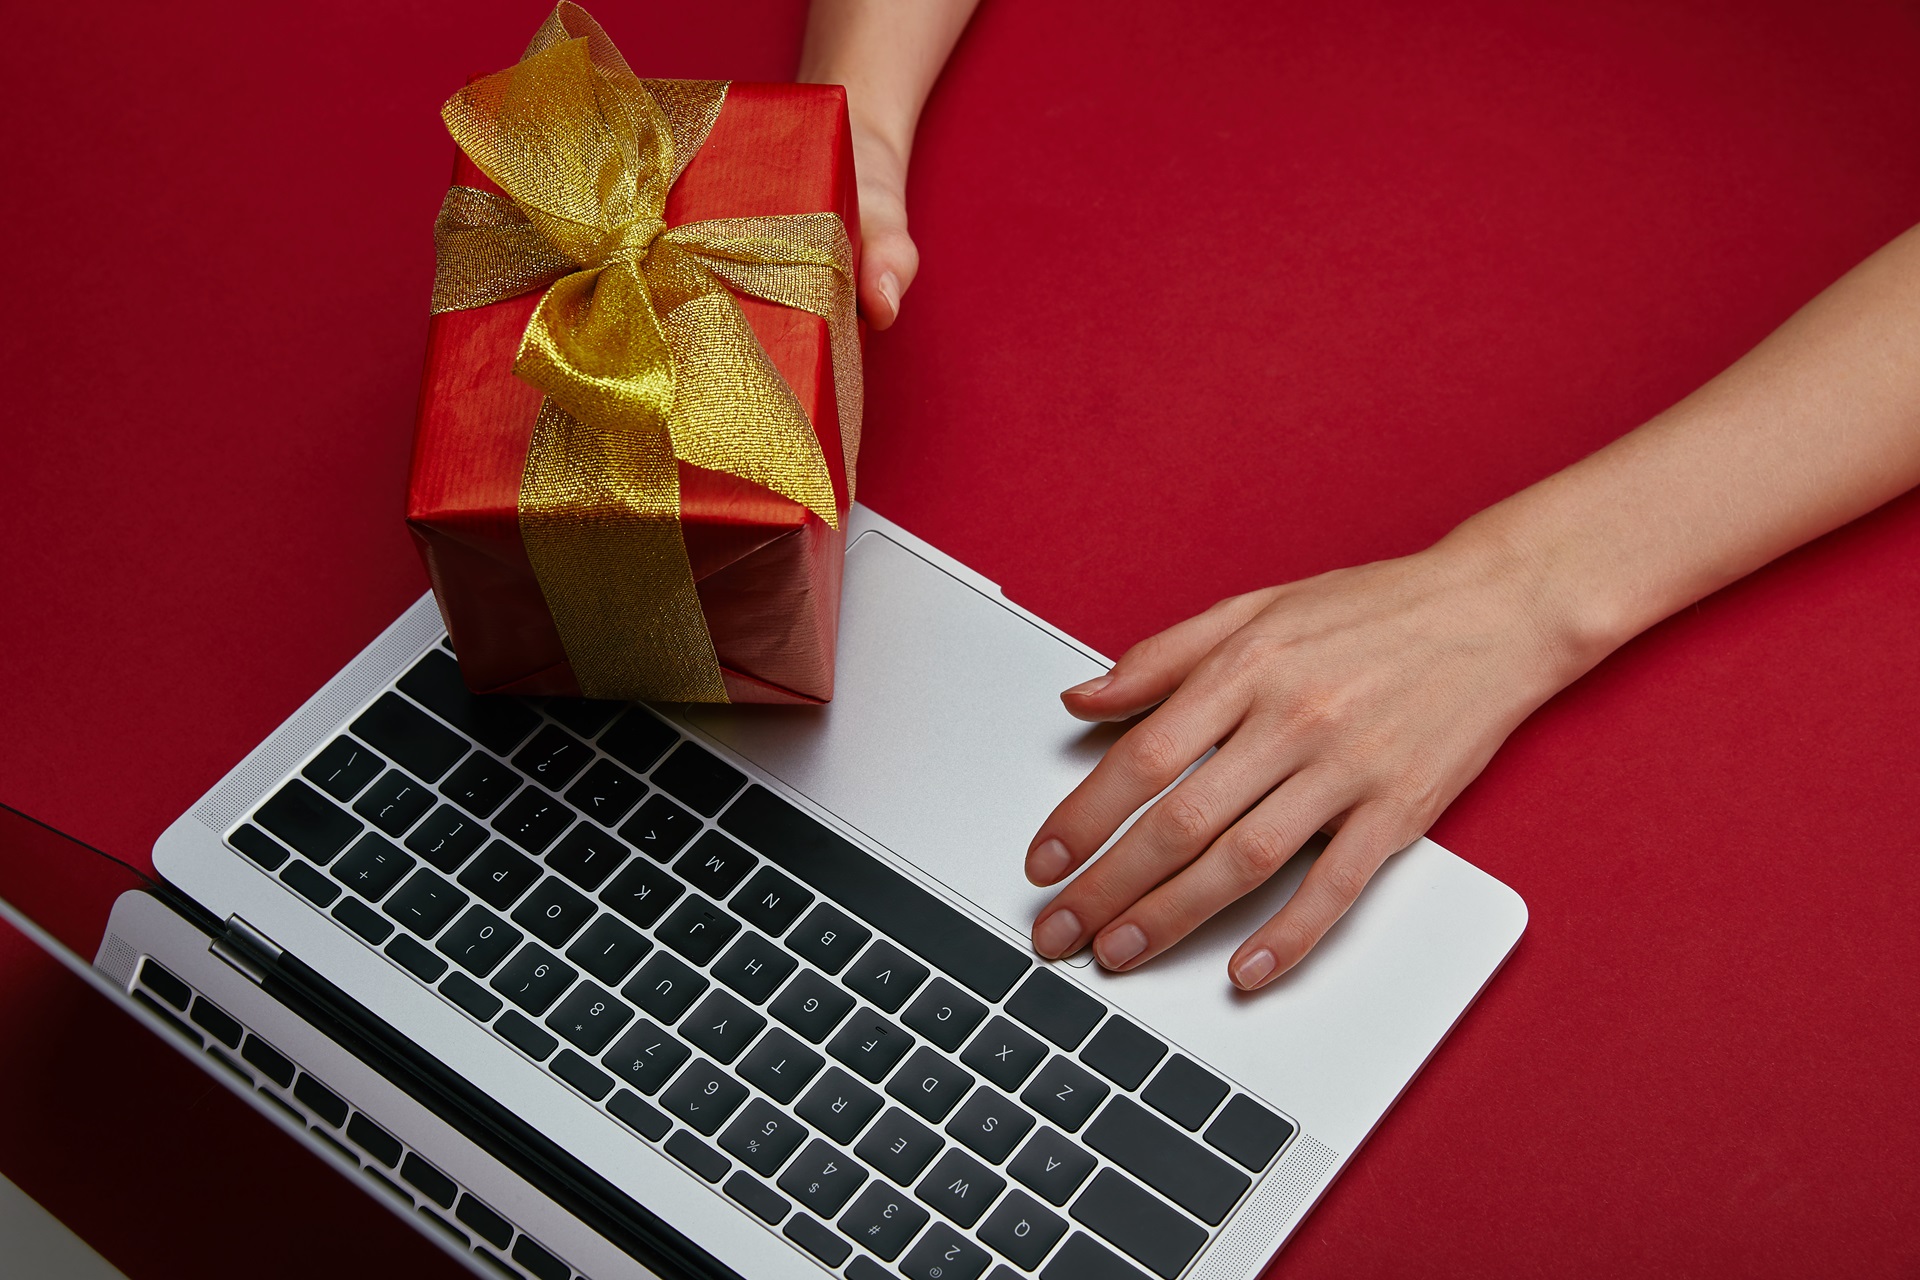 Top Occasions for Sending Gifts Online in the Philippines